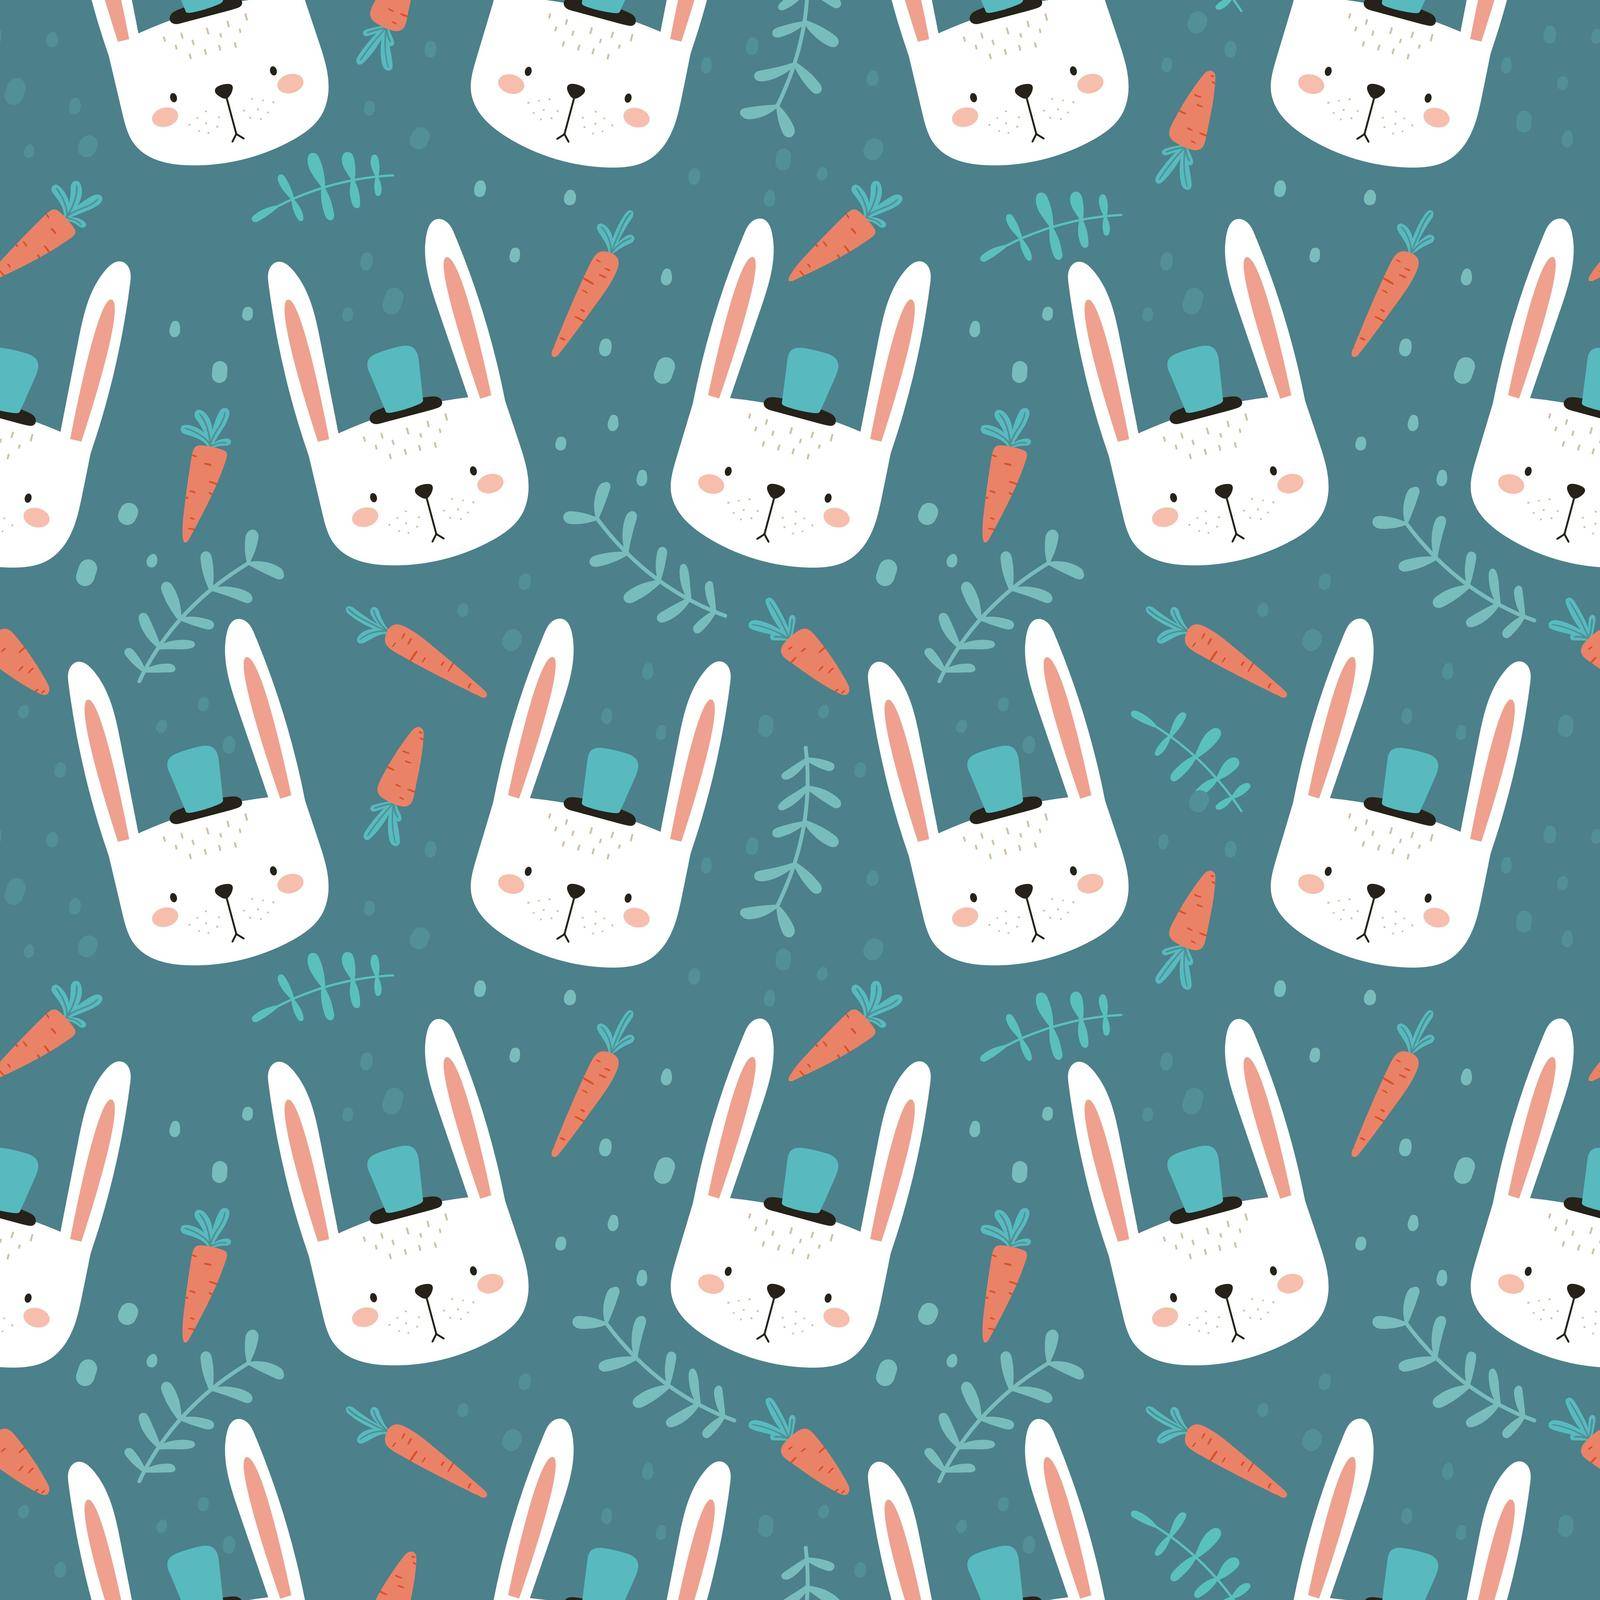 Rabbits seamless pattern. Funny hand-drawn rabbits and carrots in a simple childish style on a dark green background. by Lena_Khmelniuk